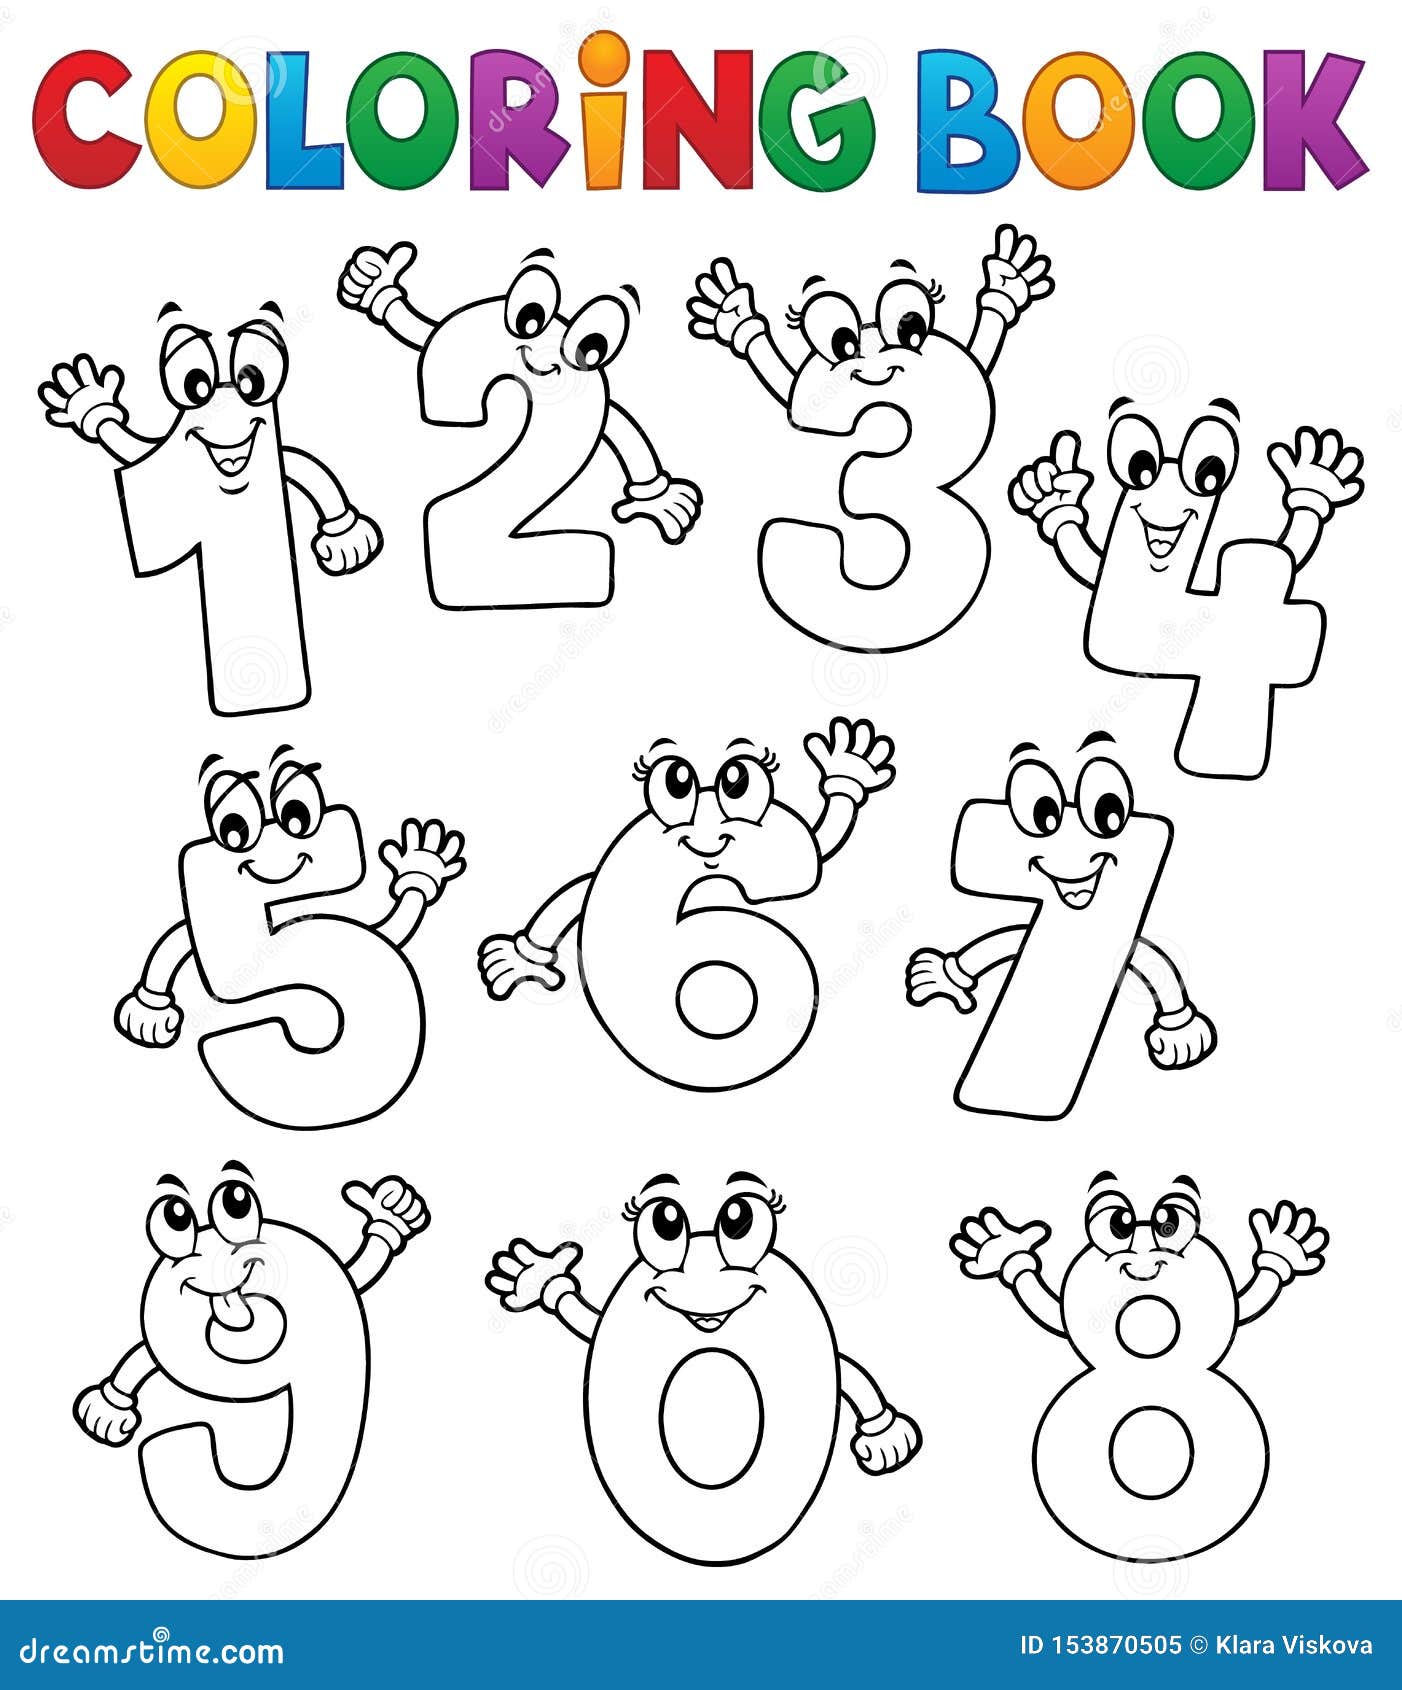 Coloring book numbers mor rioghain